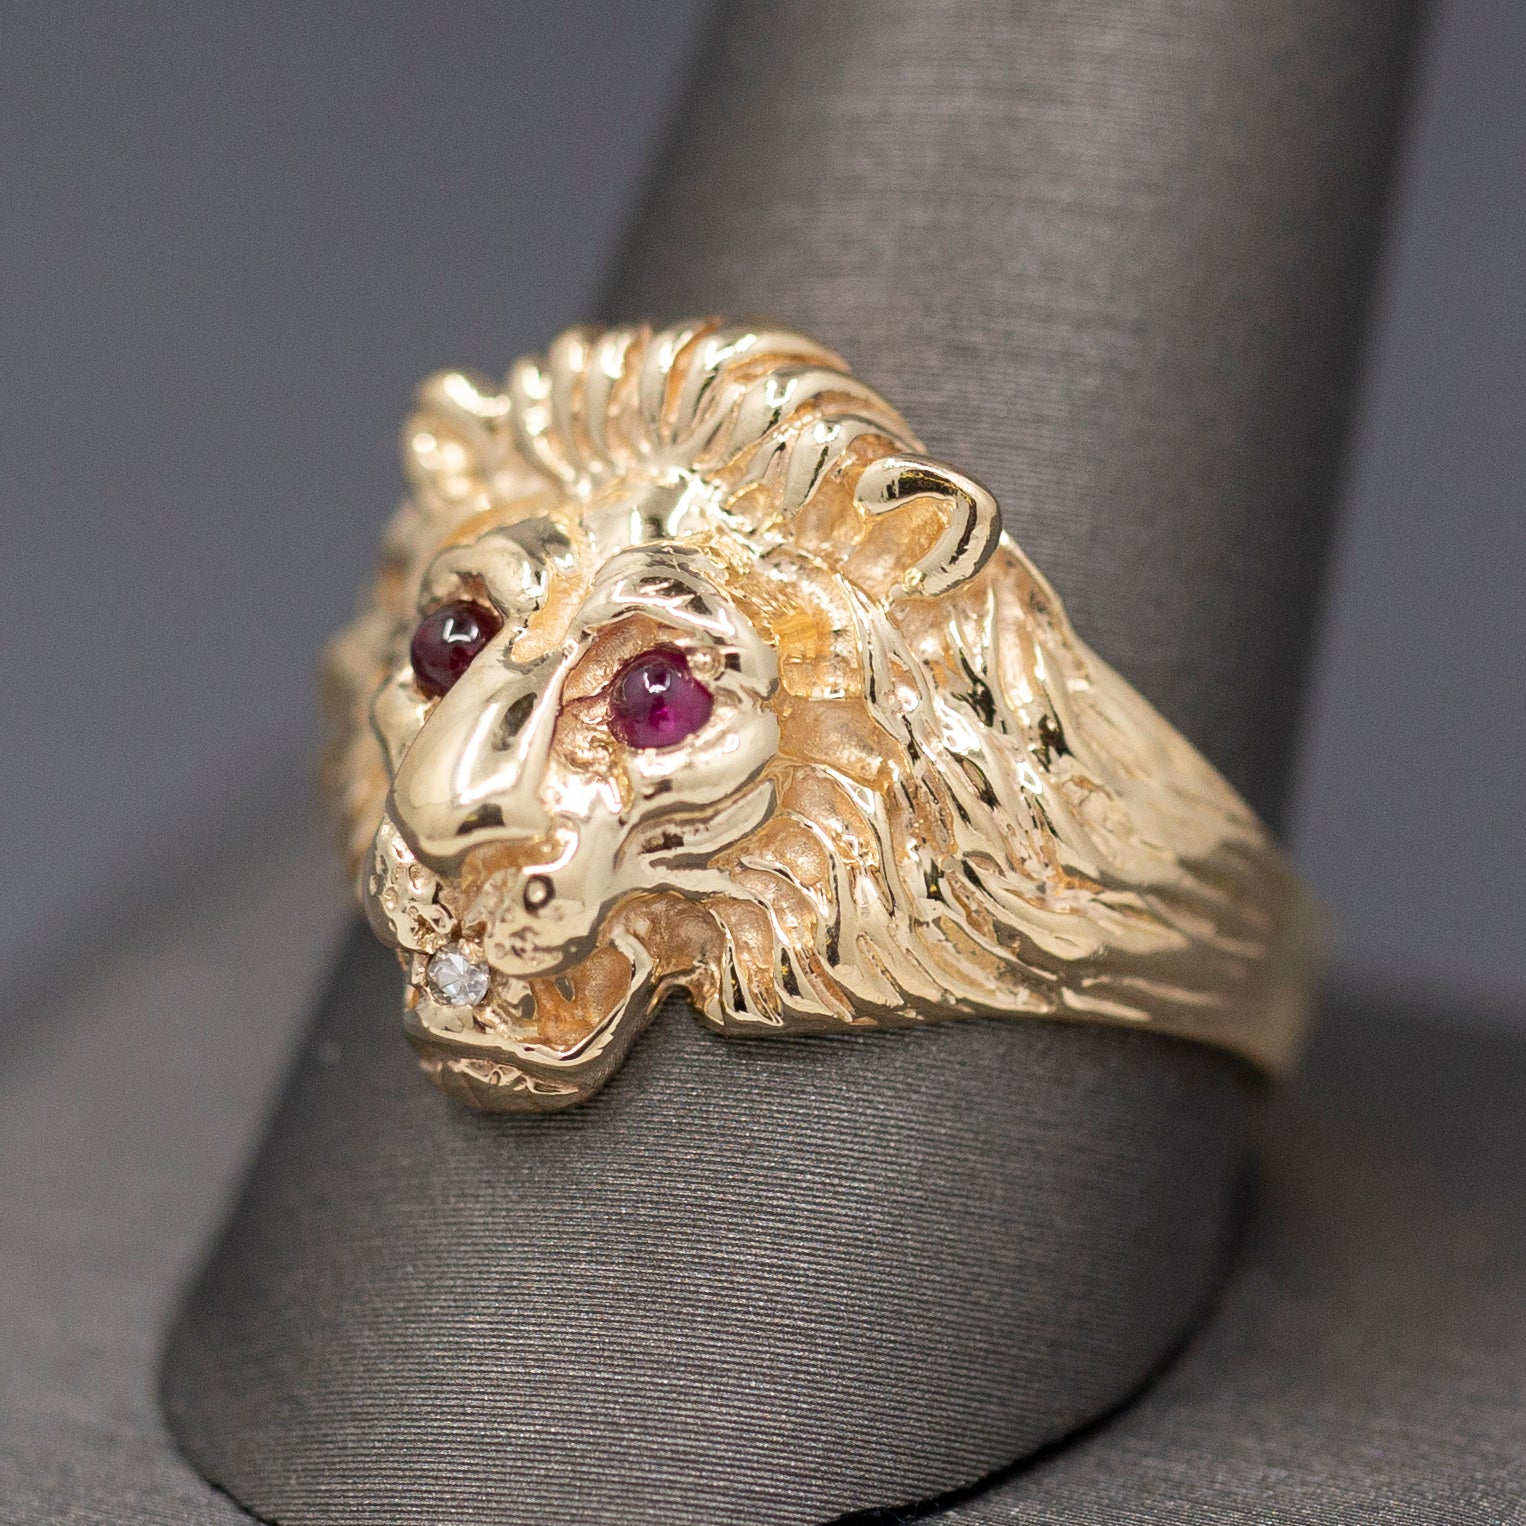 Vintage Lion Head Ring with Ruby Eyes and Diamond in Mouth in 14k Yellow Gold